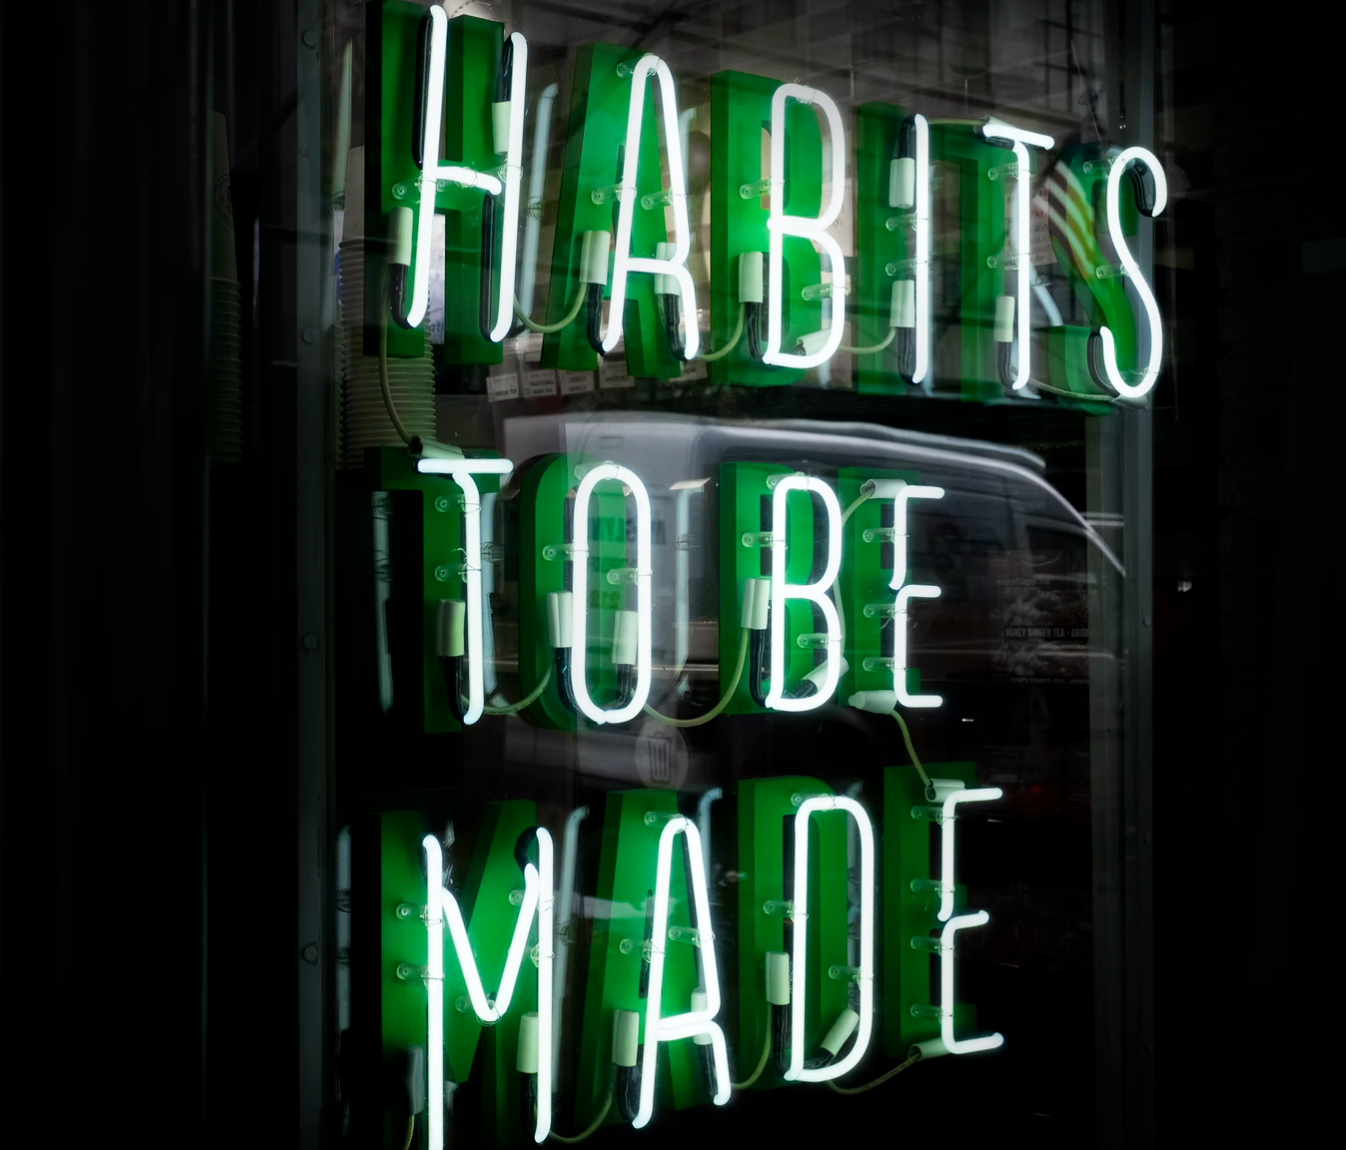 The underrated role of marketing habits